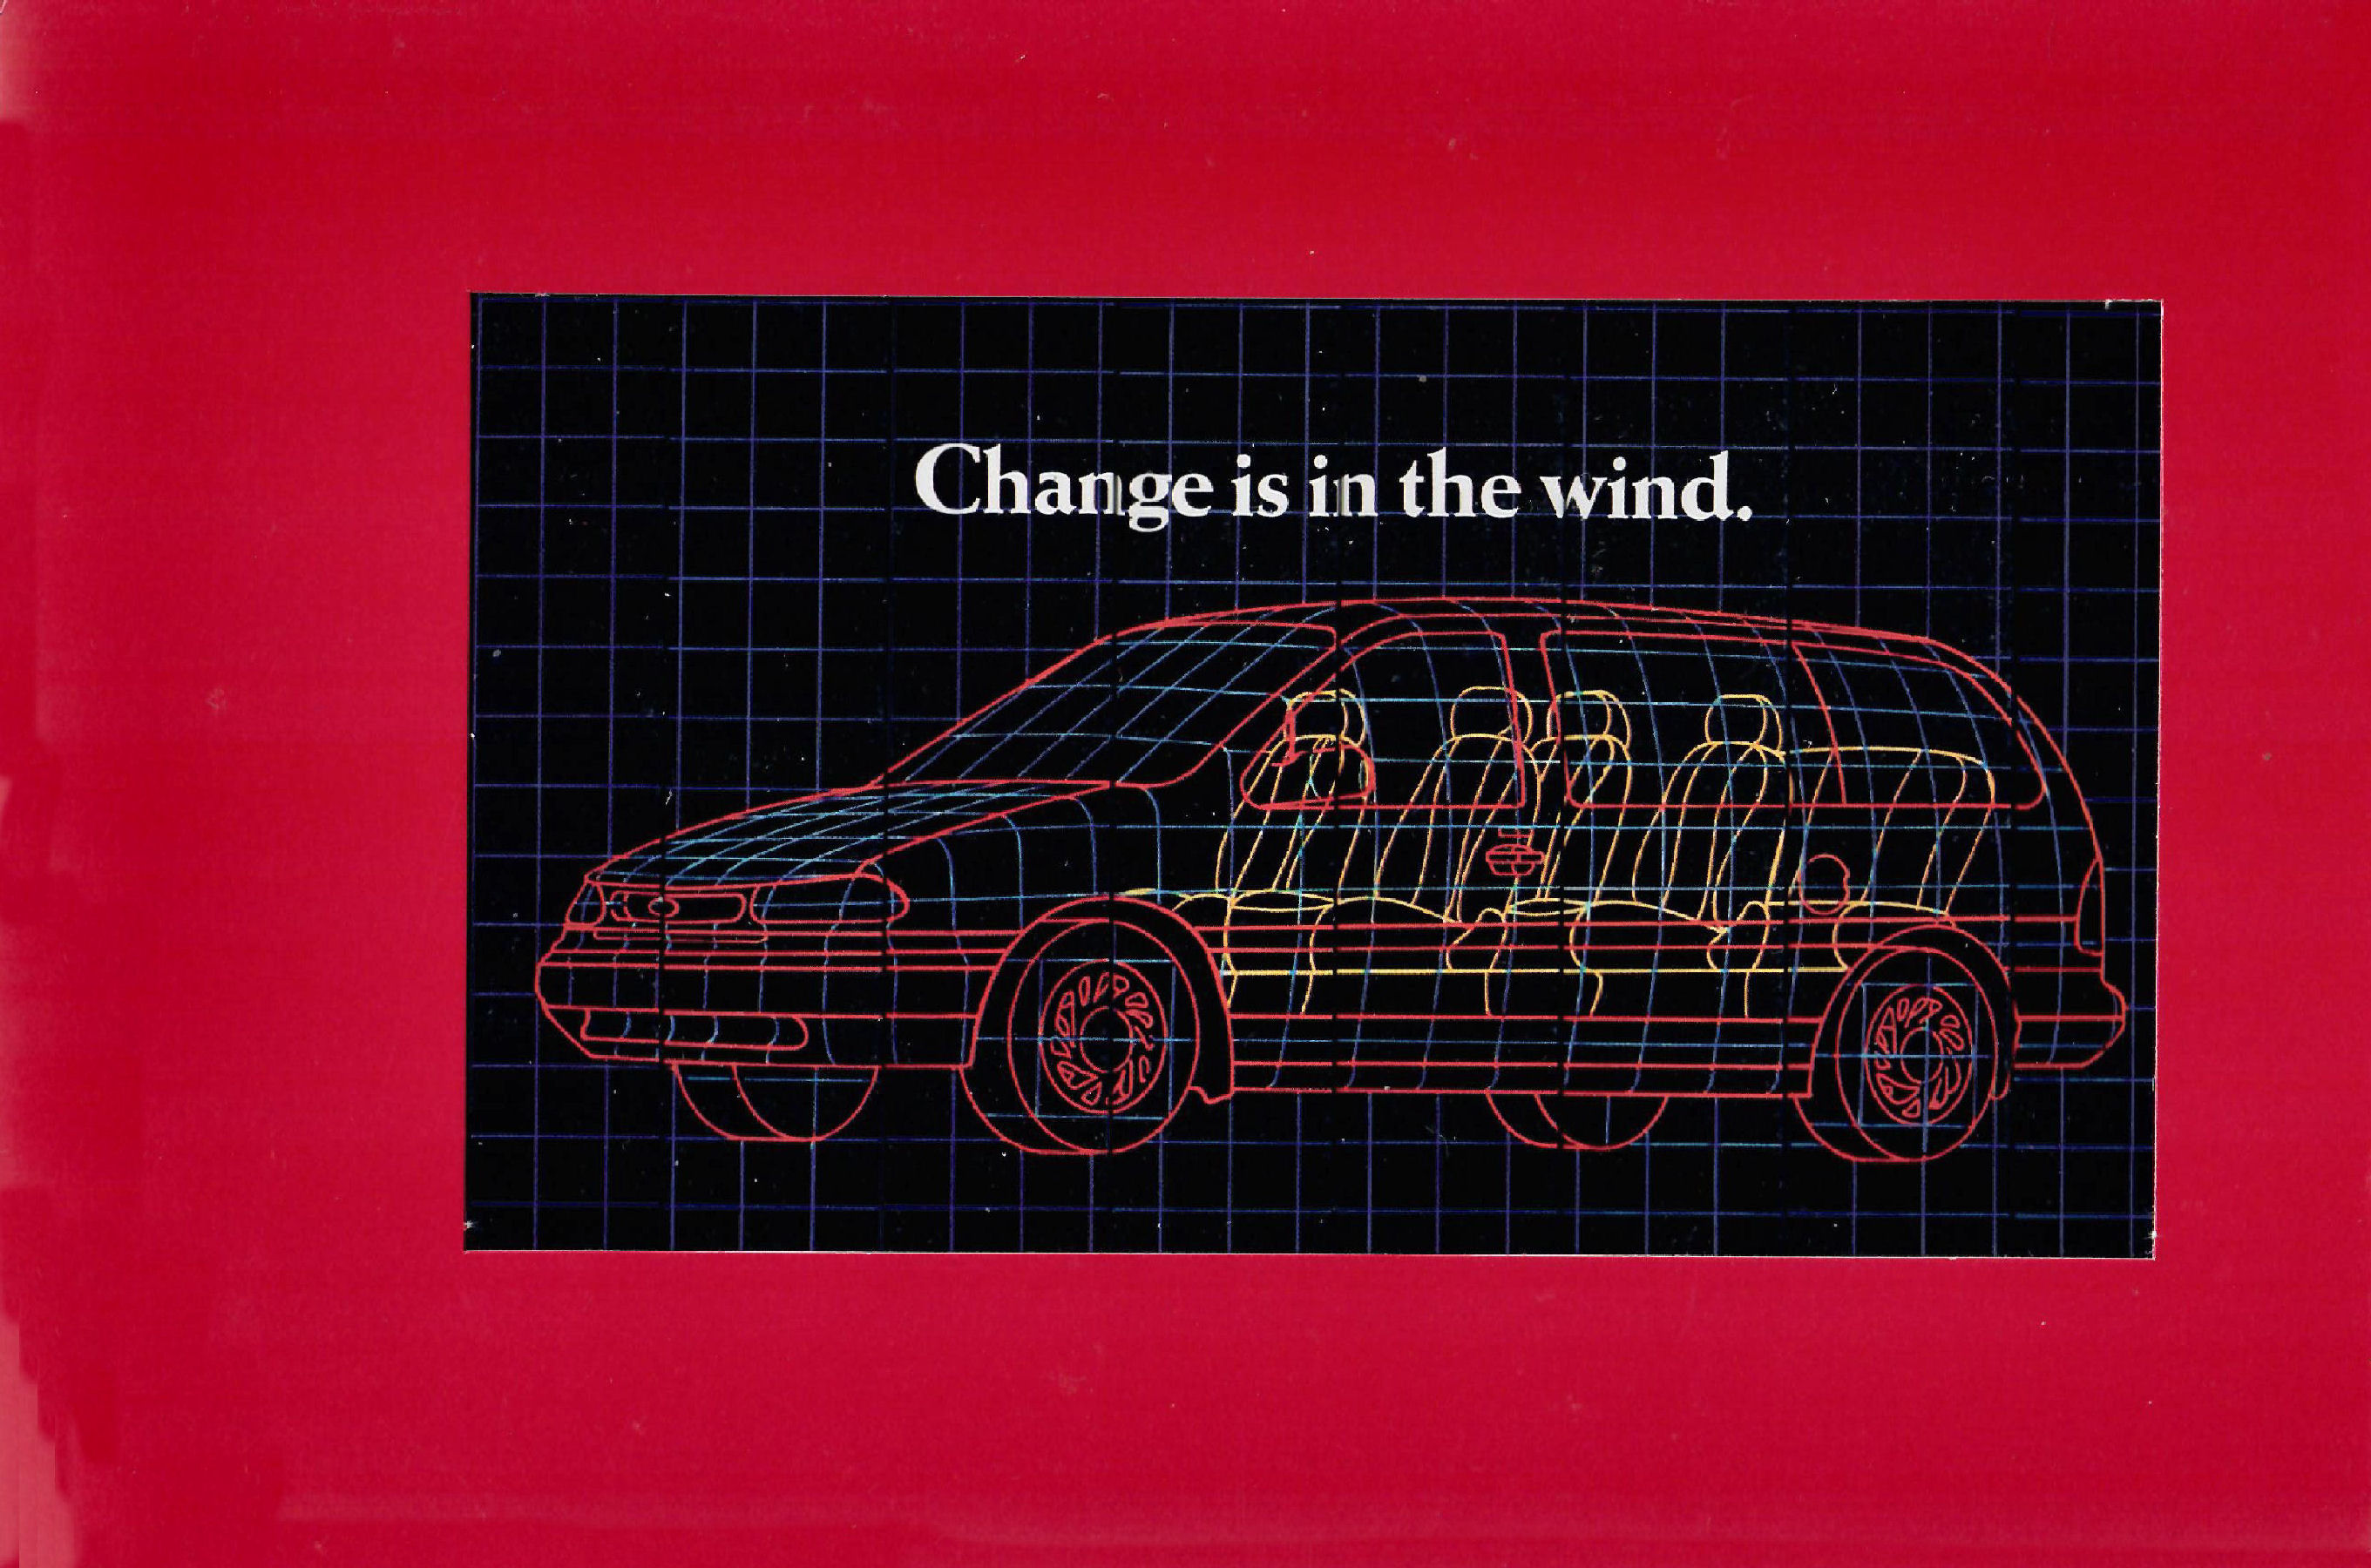 1995 Ford Windstar Intro Mailer-01